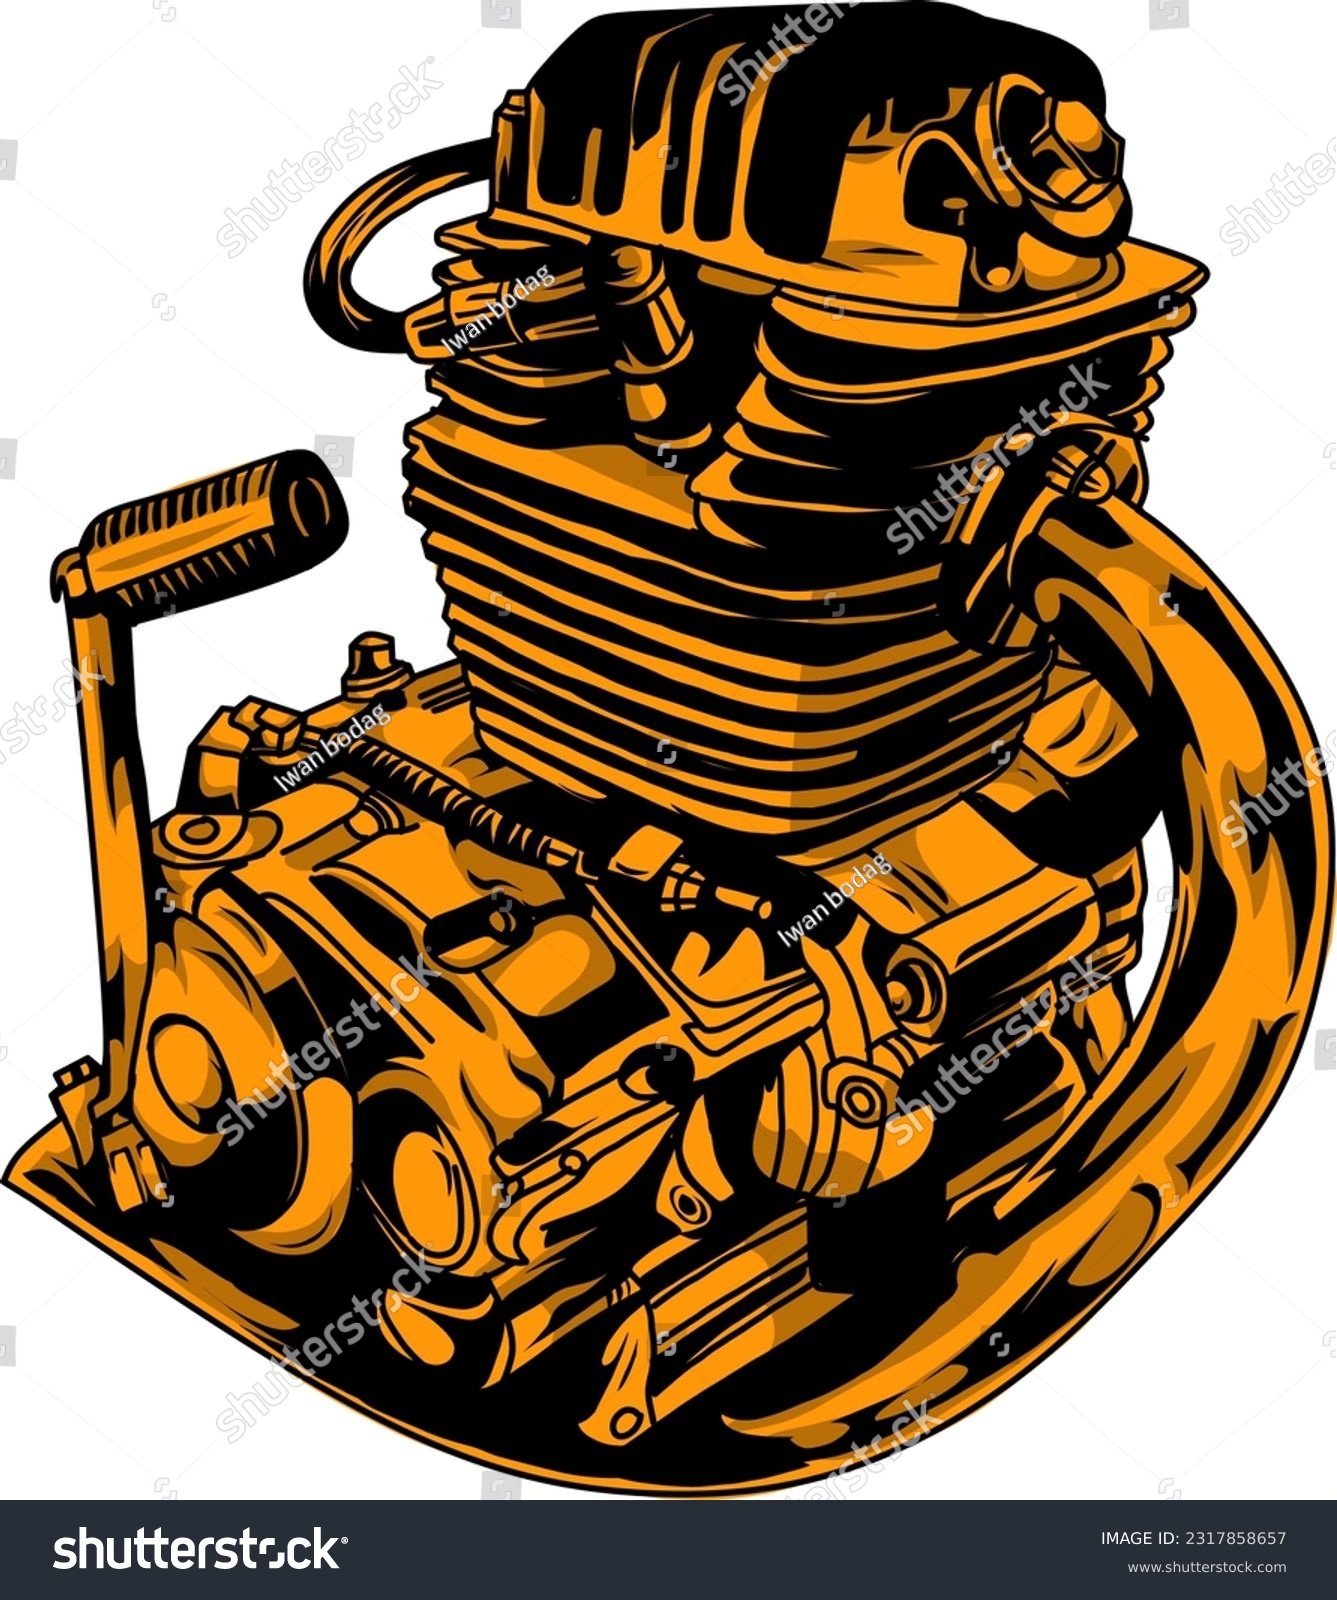 SVG of vector style motorcycle engine with golden color svg